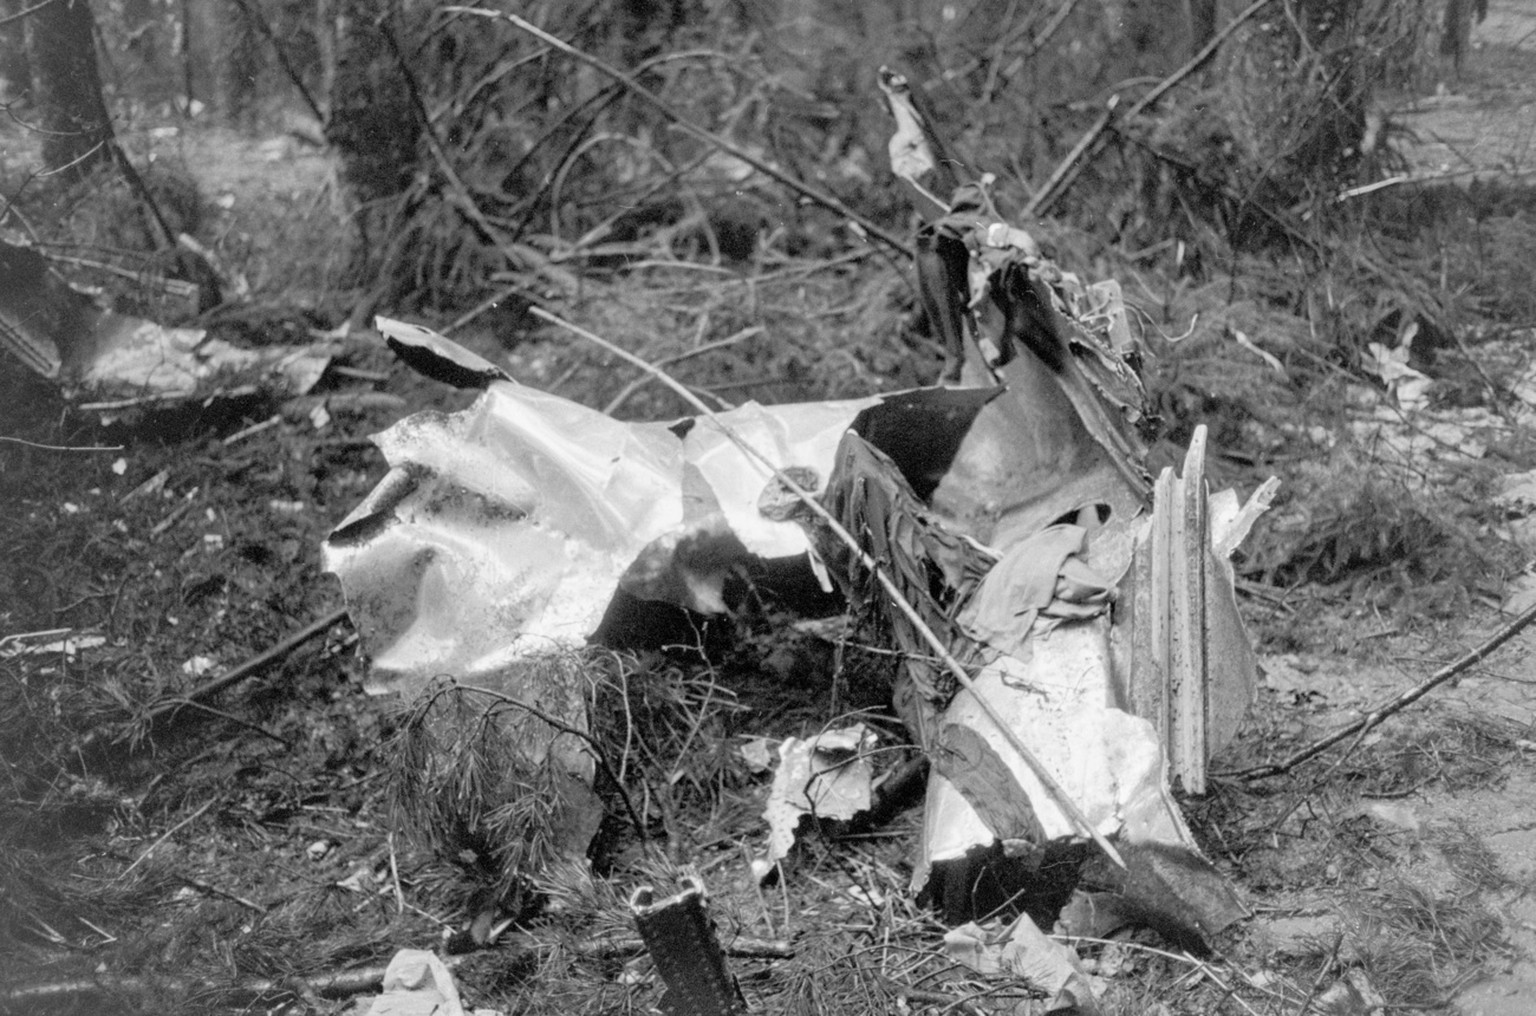 Debris from the Swissair plane, Coronado CV-990, is scattered in the forest near Wuerenlingen in the canton of Aargau. On 21 February 1970, shortly after take-off, a bomb set by Palestinian terrorists ...